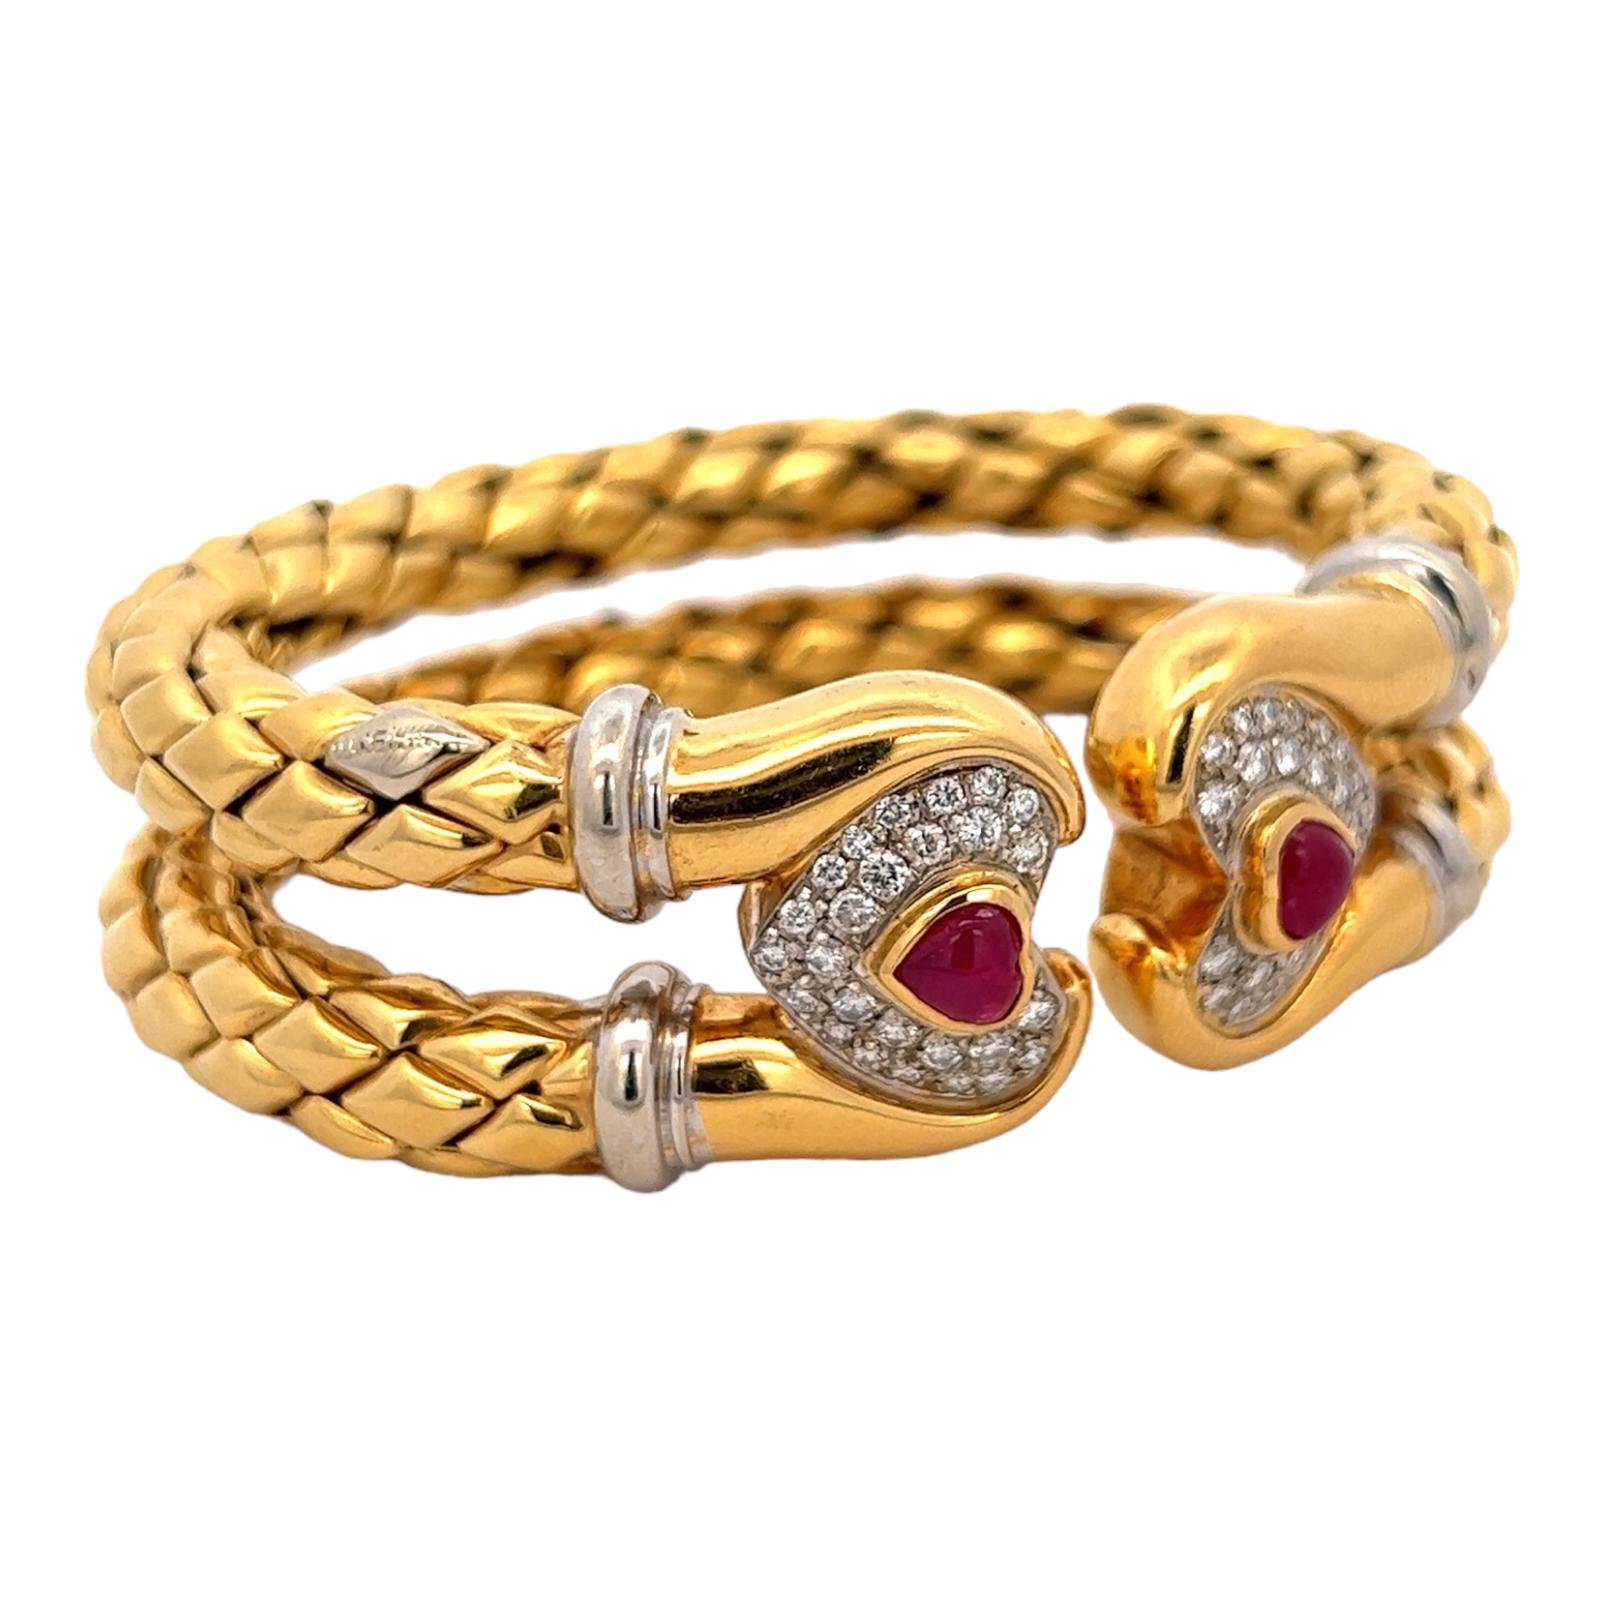 Diamond and ruby cuff bracelet by designer Chimento. The cuff features two rows of flexible woven 18 karat yellow gold with diamond and ruby heart endcaps. The 52 round brilliant cut diamonds weigh approximately 1.50 CTW and are graded G-H color and